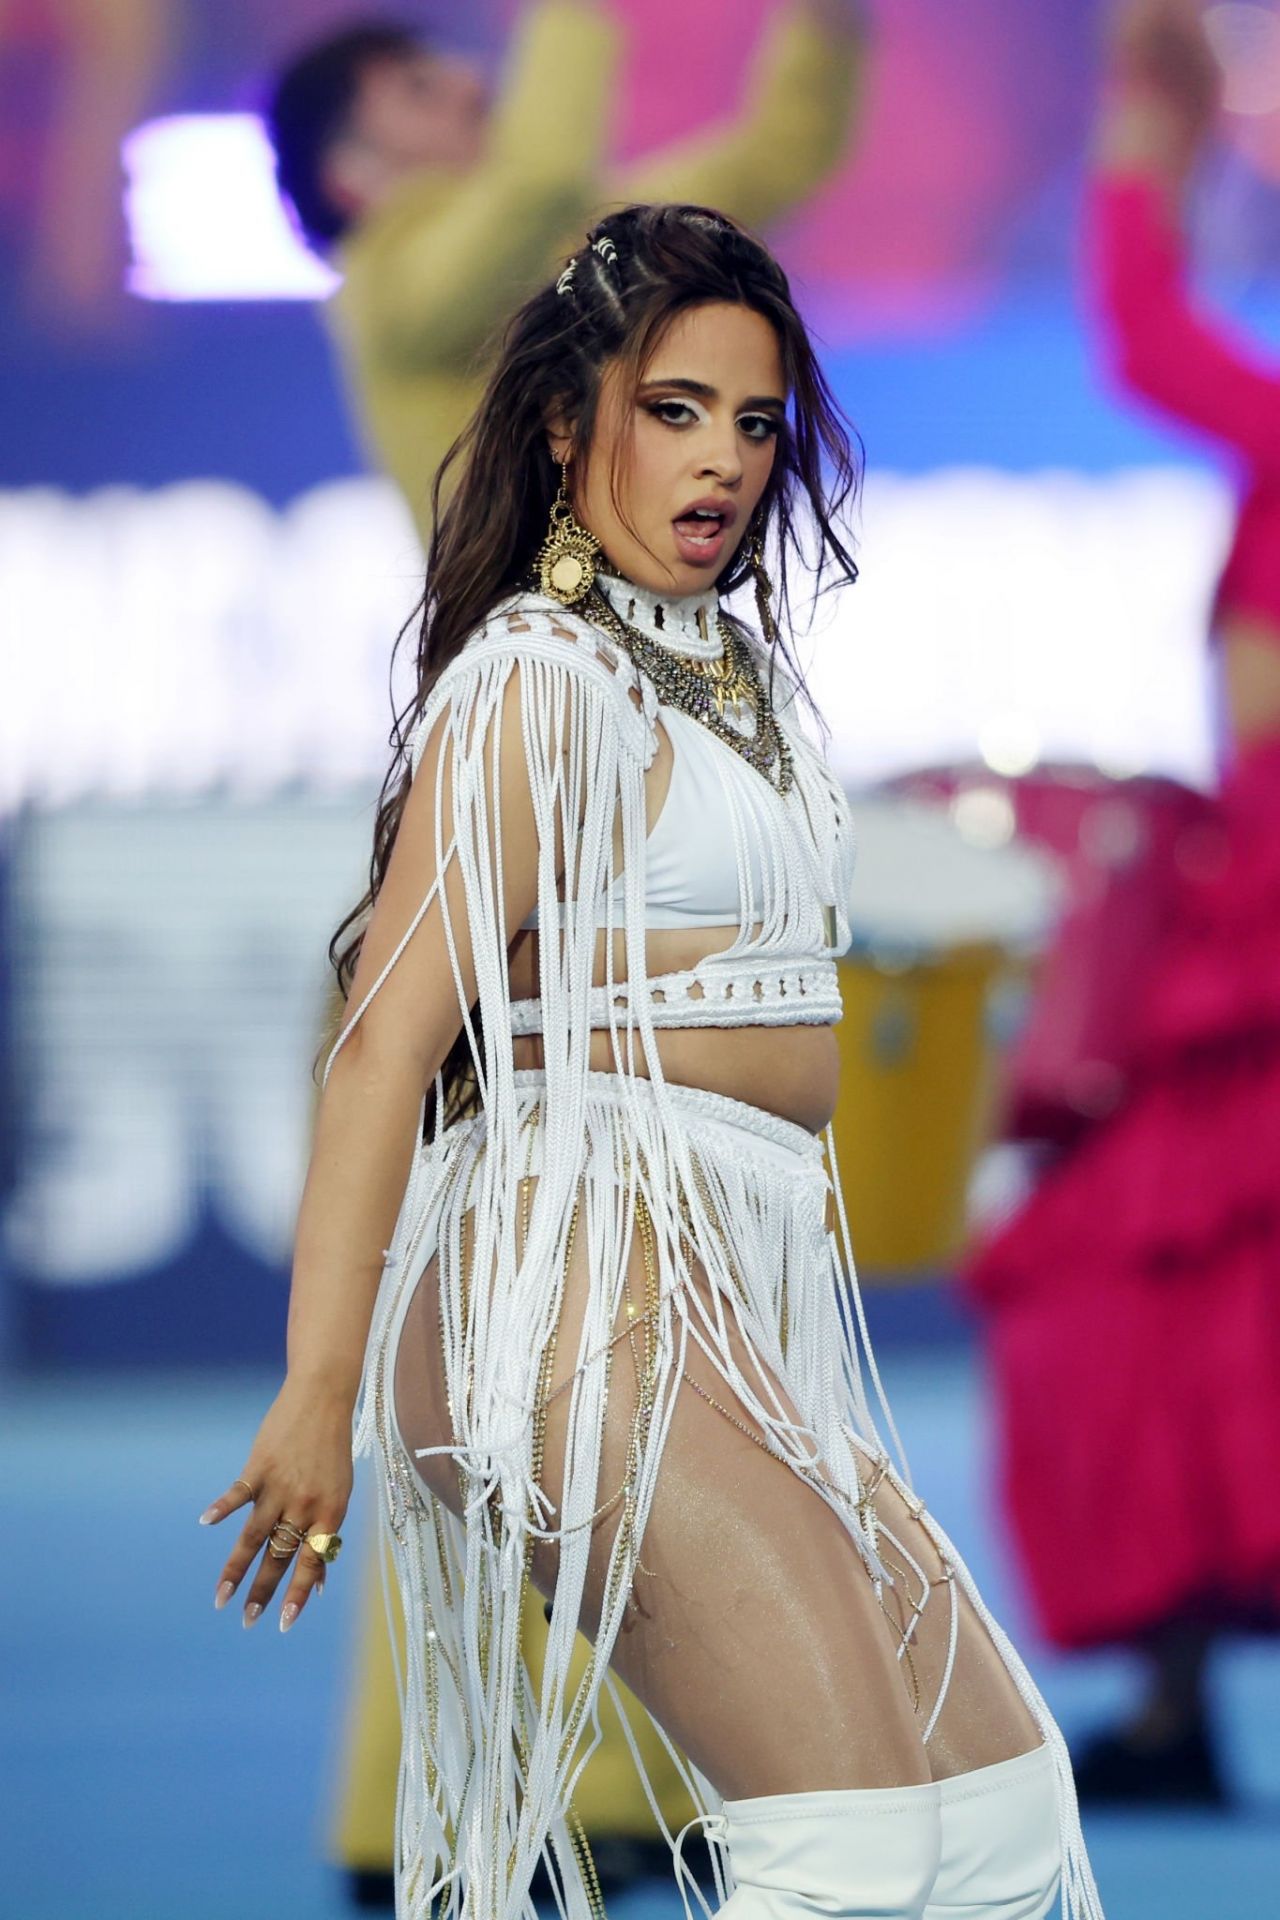 camila-cabello-performs-in-the-pre-match-show-before-the-uefa-champions-league-final-in-paris-05-28-2022-15.jpg